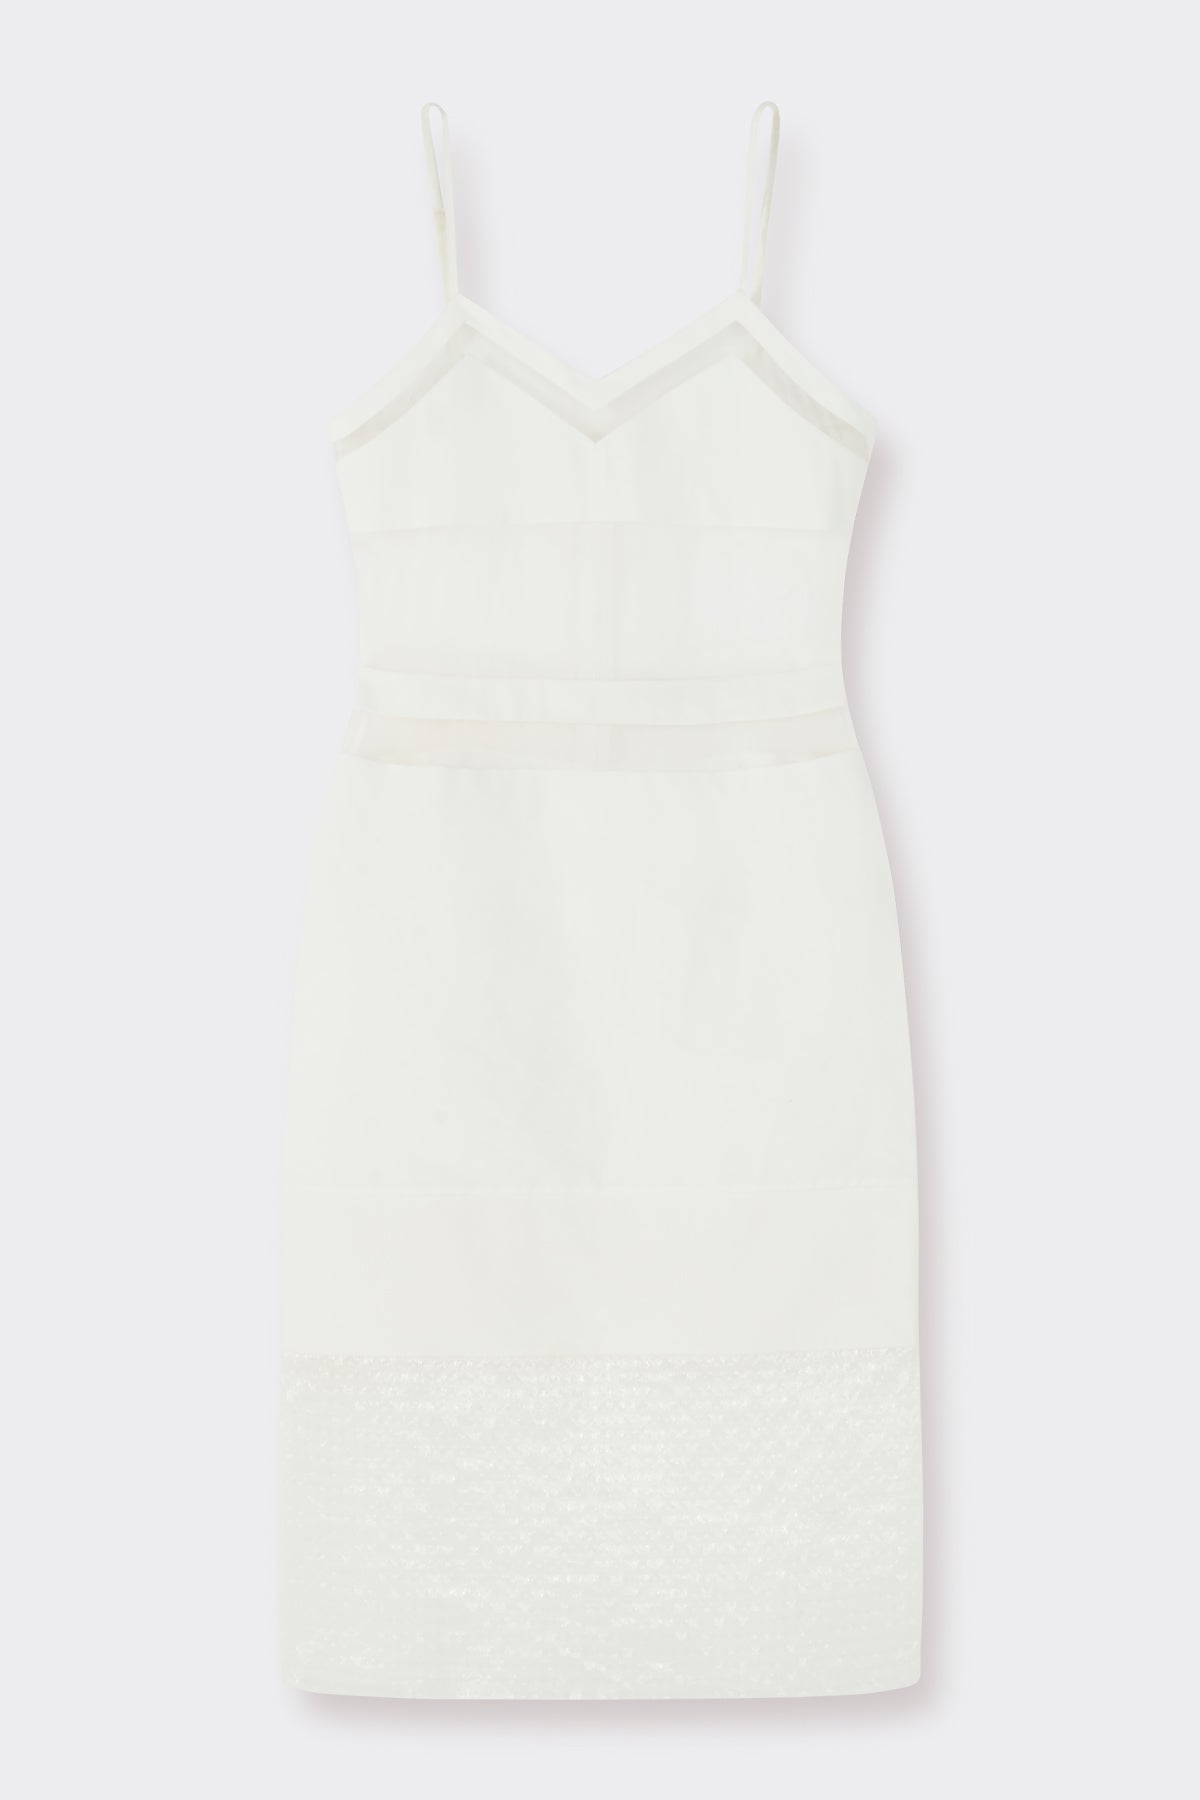 Aaliyah Dress in Linen Soft White| Noon by Noor